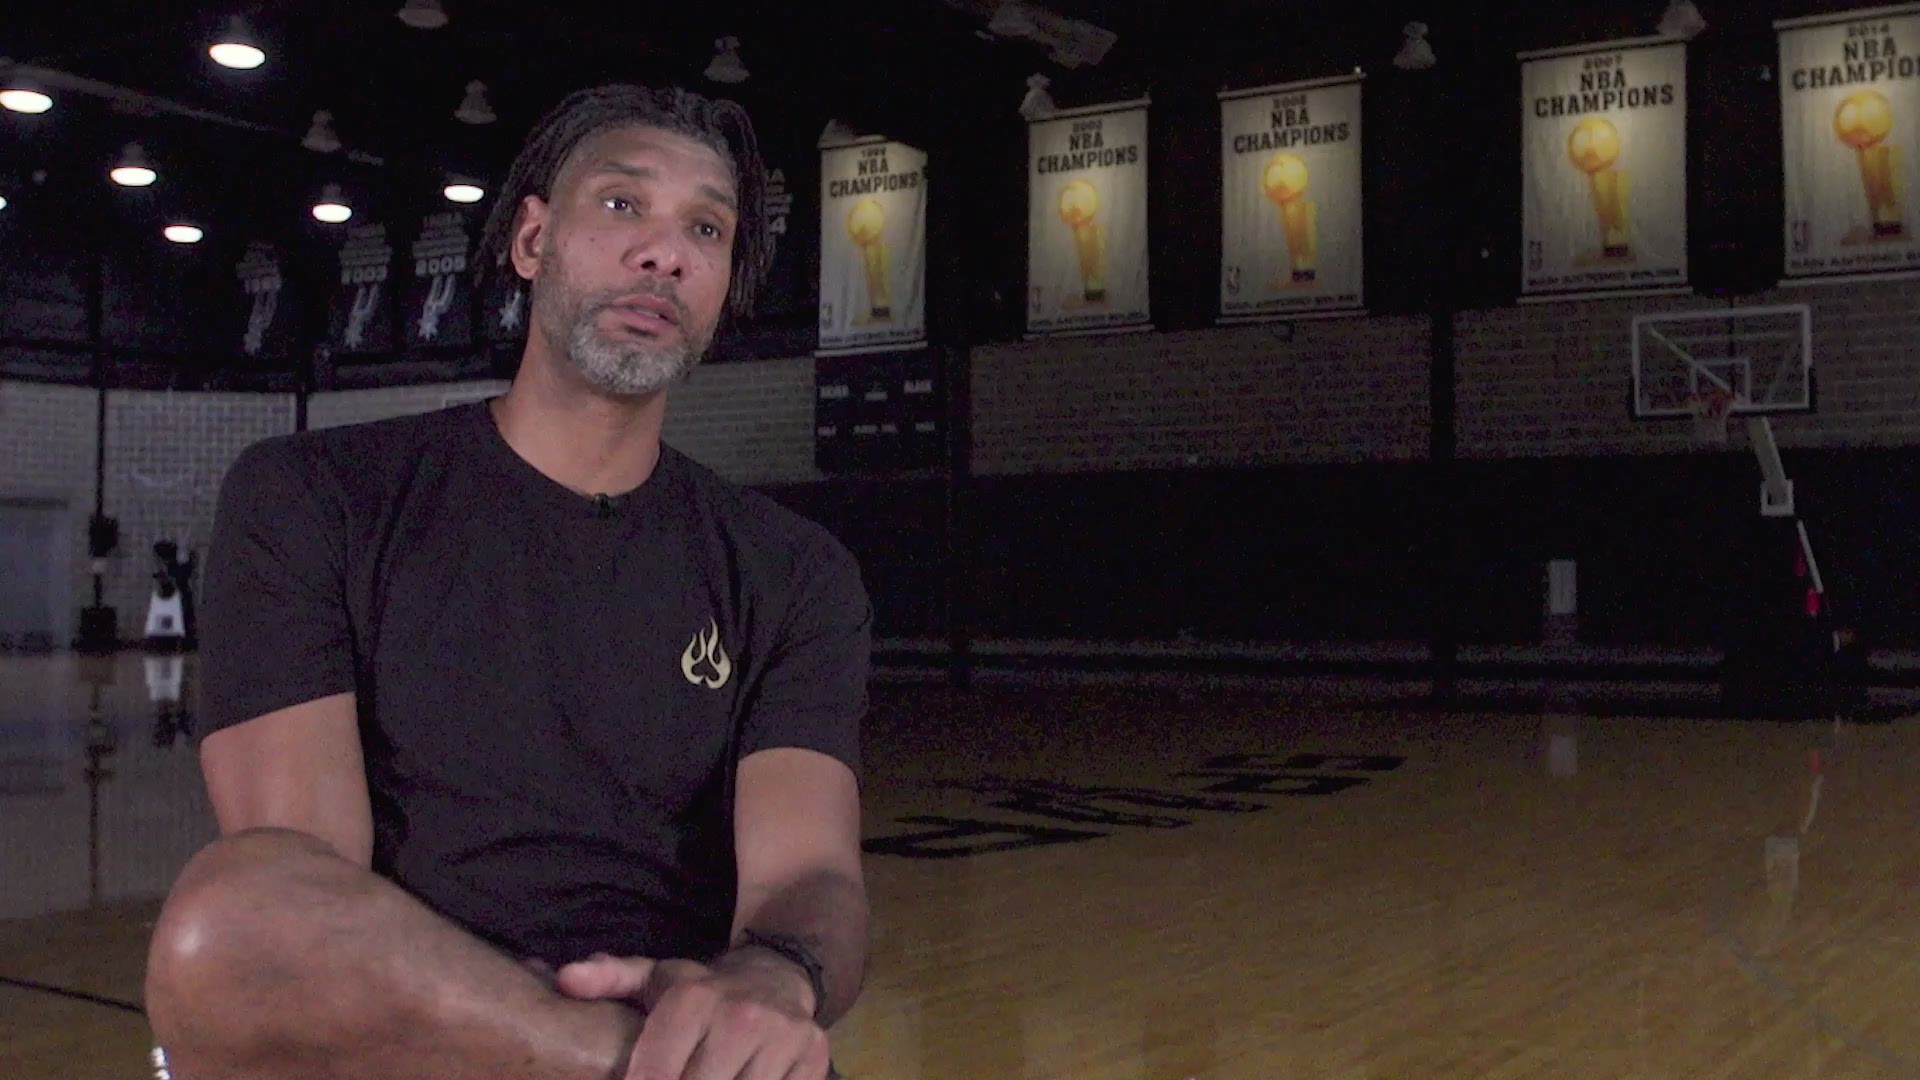 San Antonio Spurs great Tim Duncan reflects on his career ahead of his induction in the Naismith Basketball Hall of Fame.